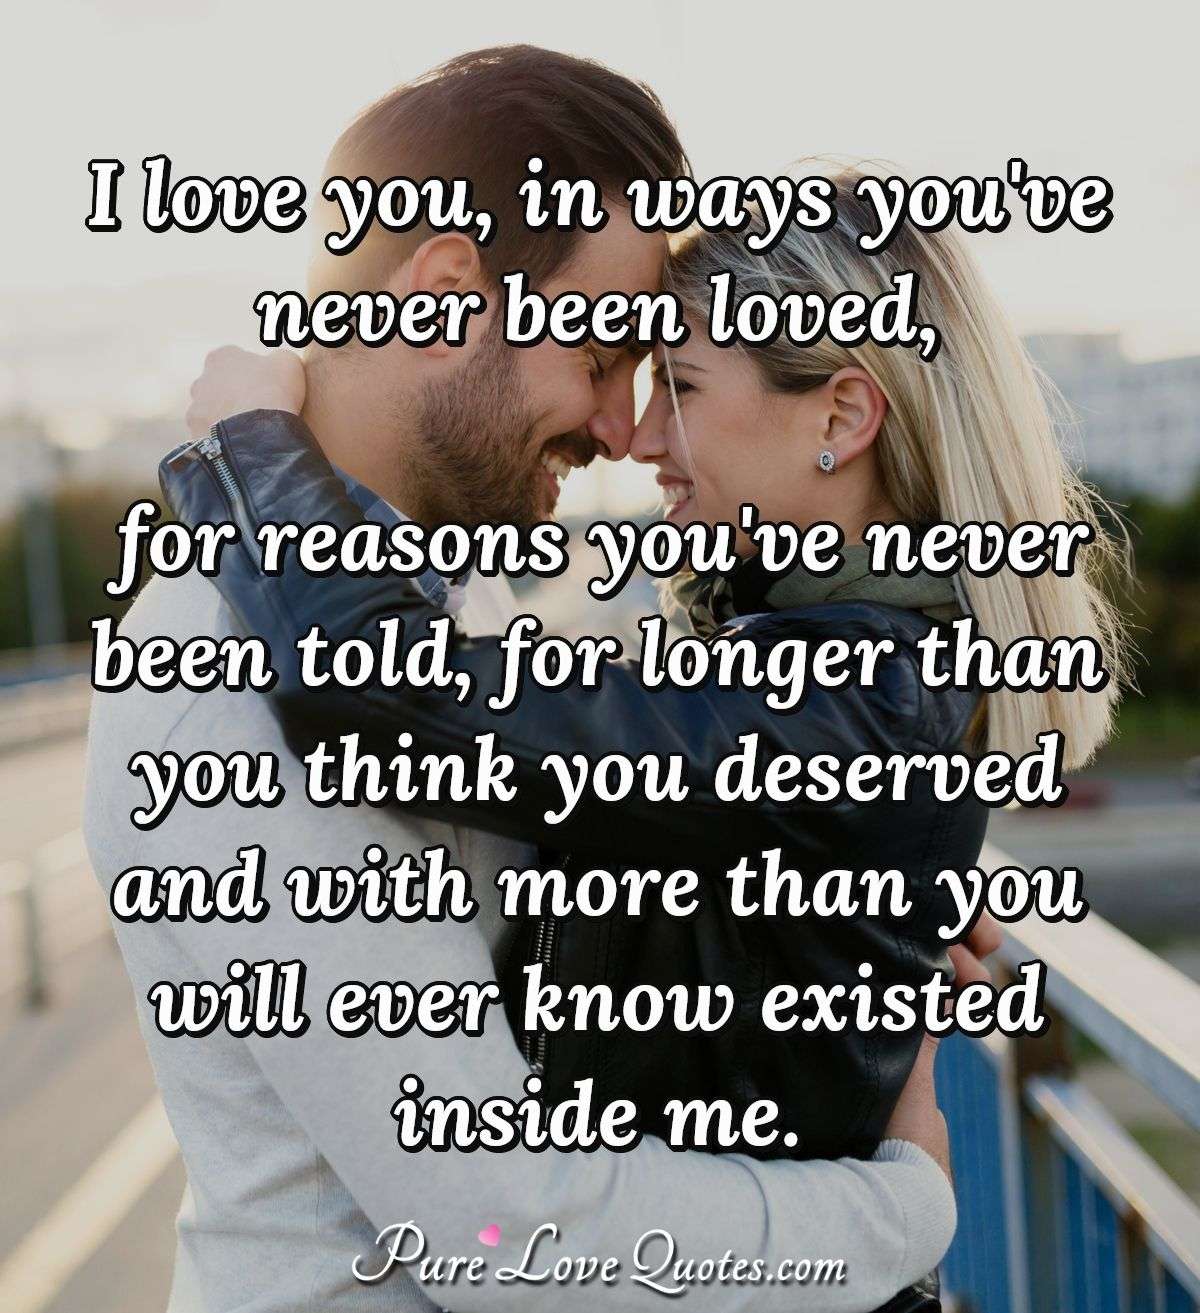 I Love You In Ways Youve Never Been Loved For Reasons Youve Never Been Told Purelovequotes